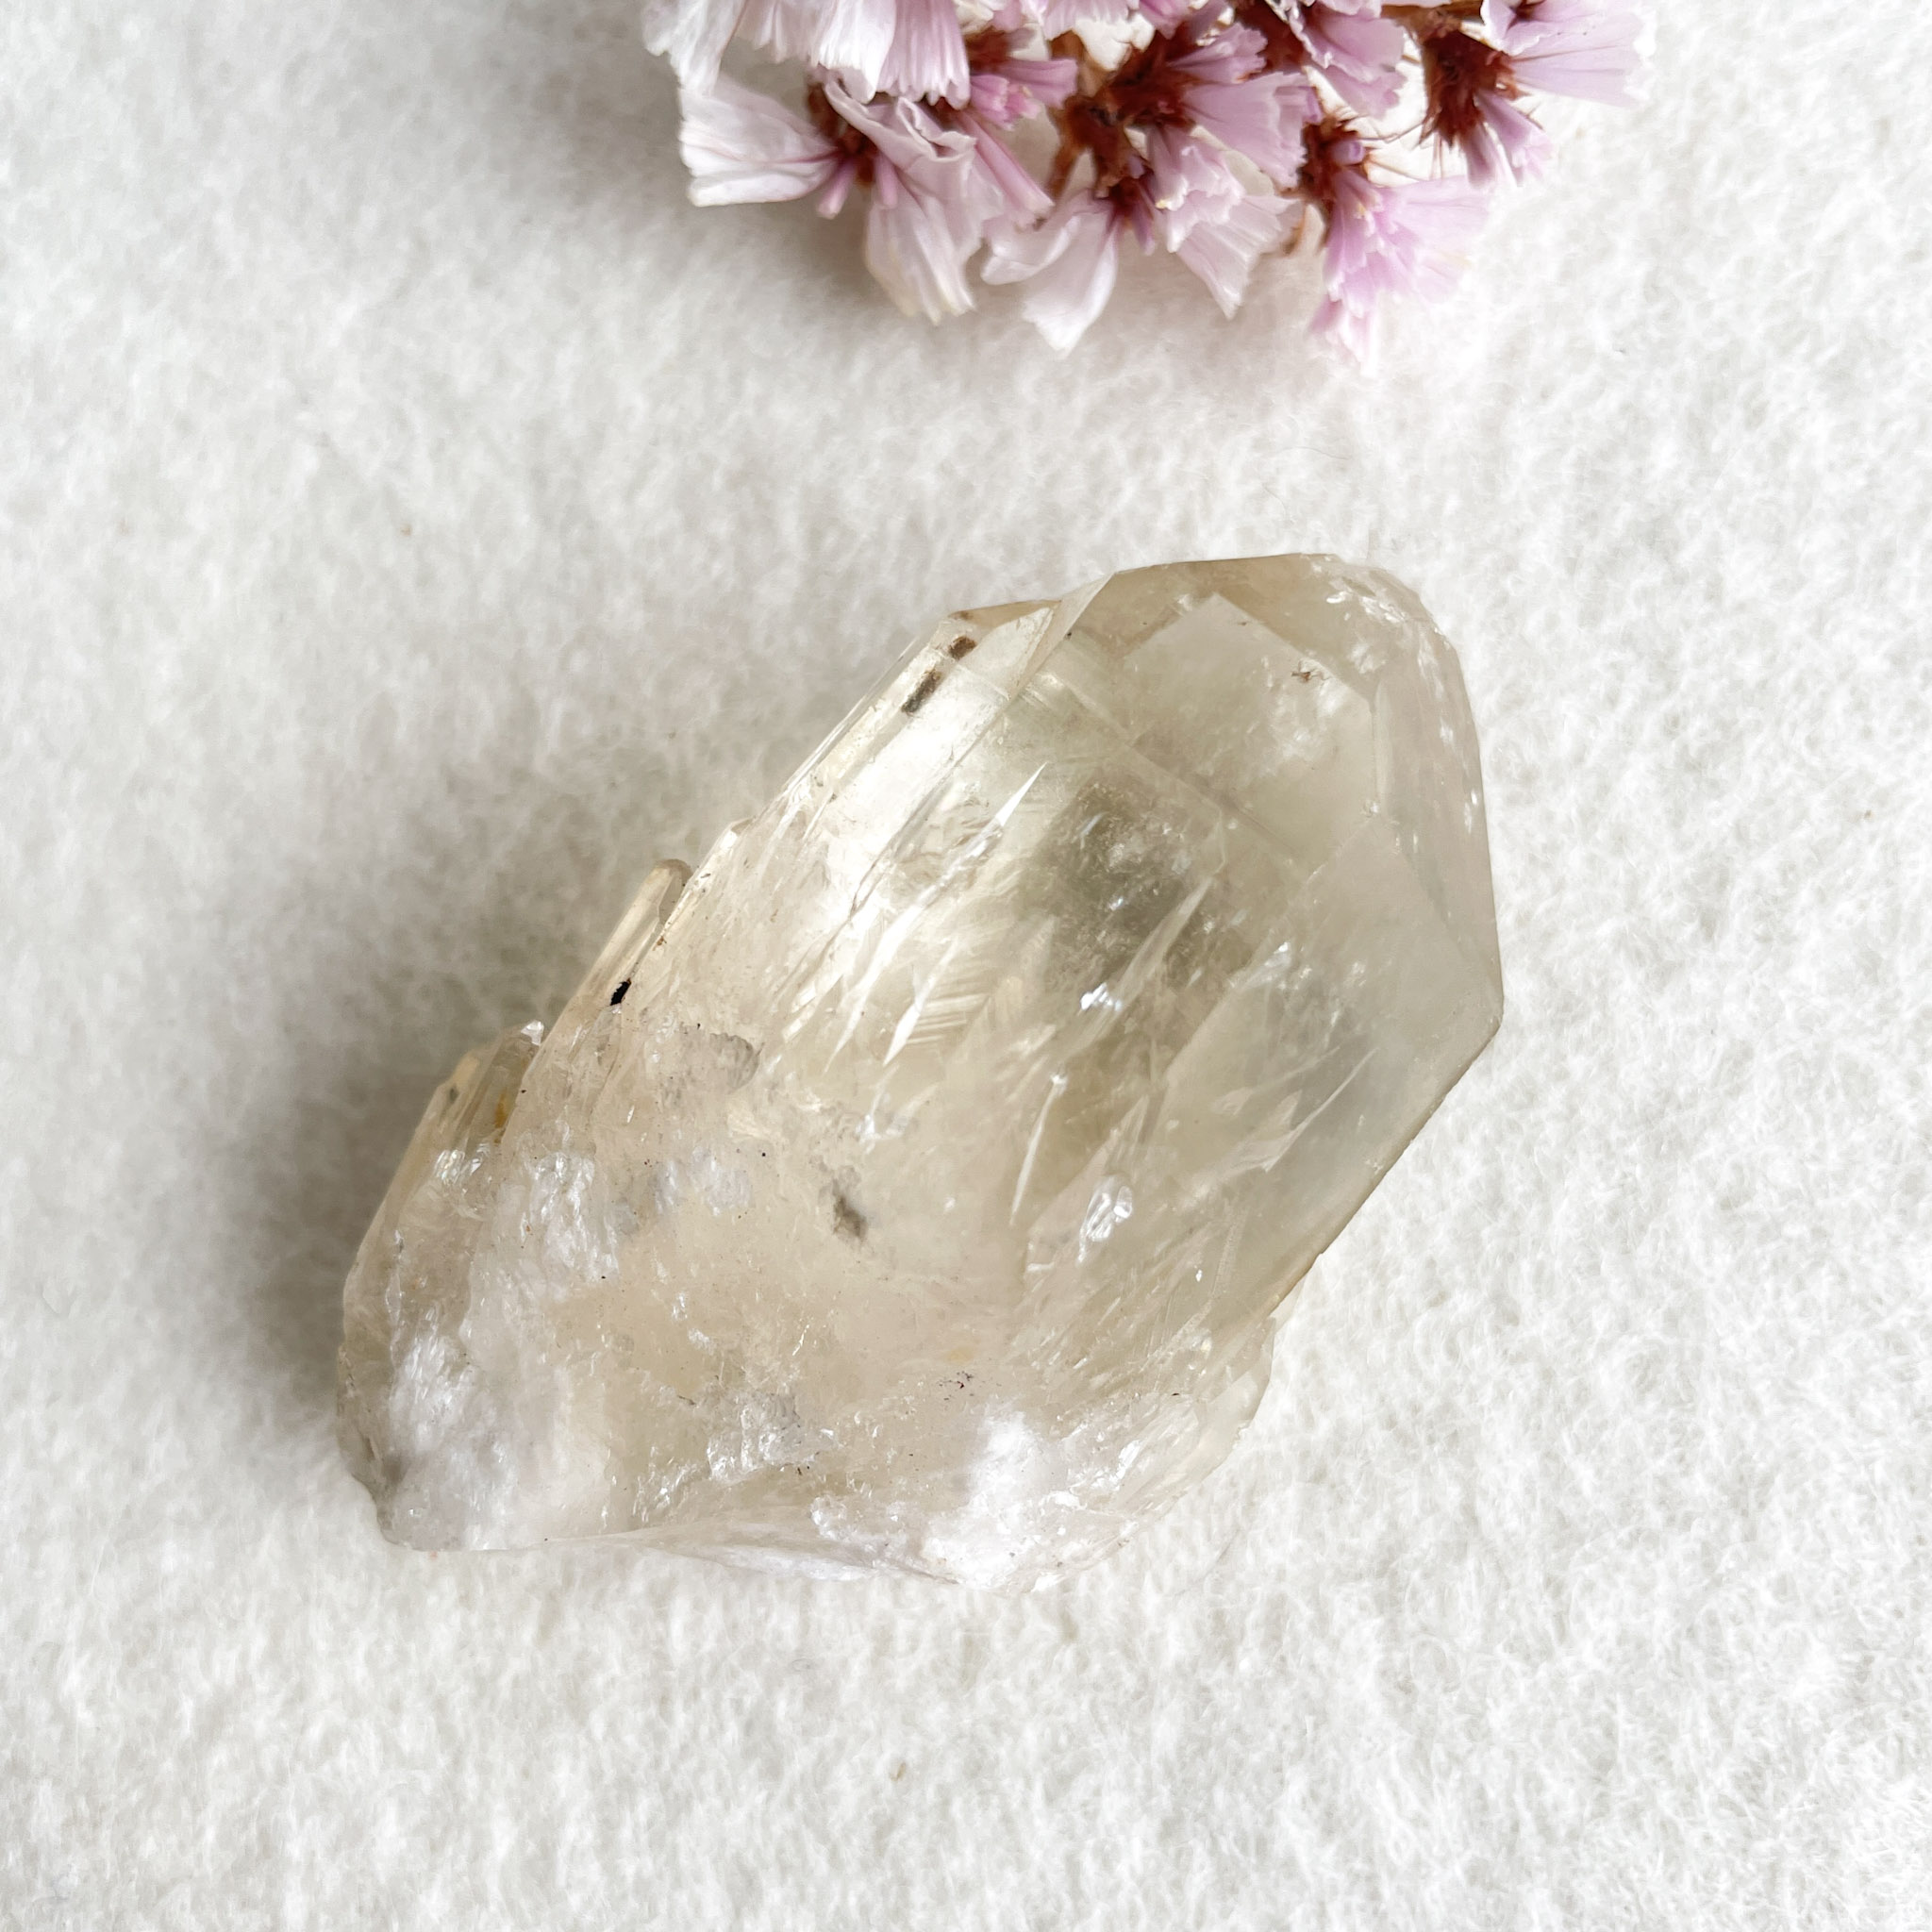 A transparent crystal with naturally faceted surfaces on a white textured background, accompanied by a small cluster of pink flowers in the corner.